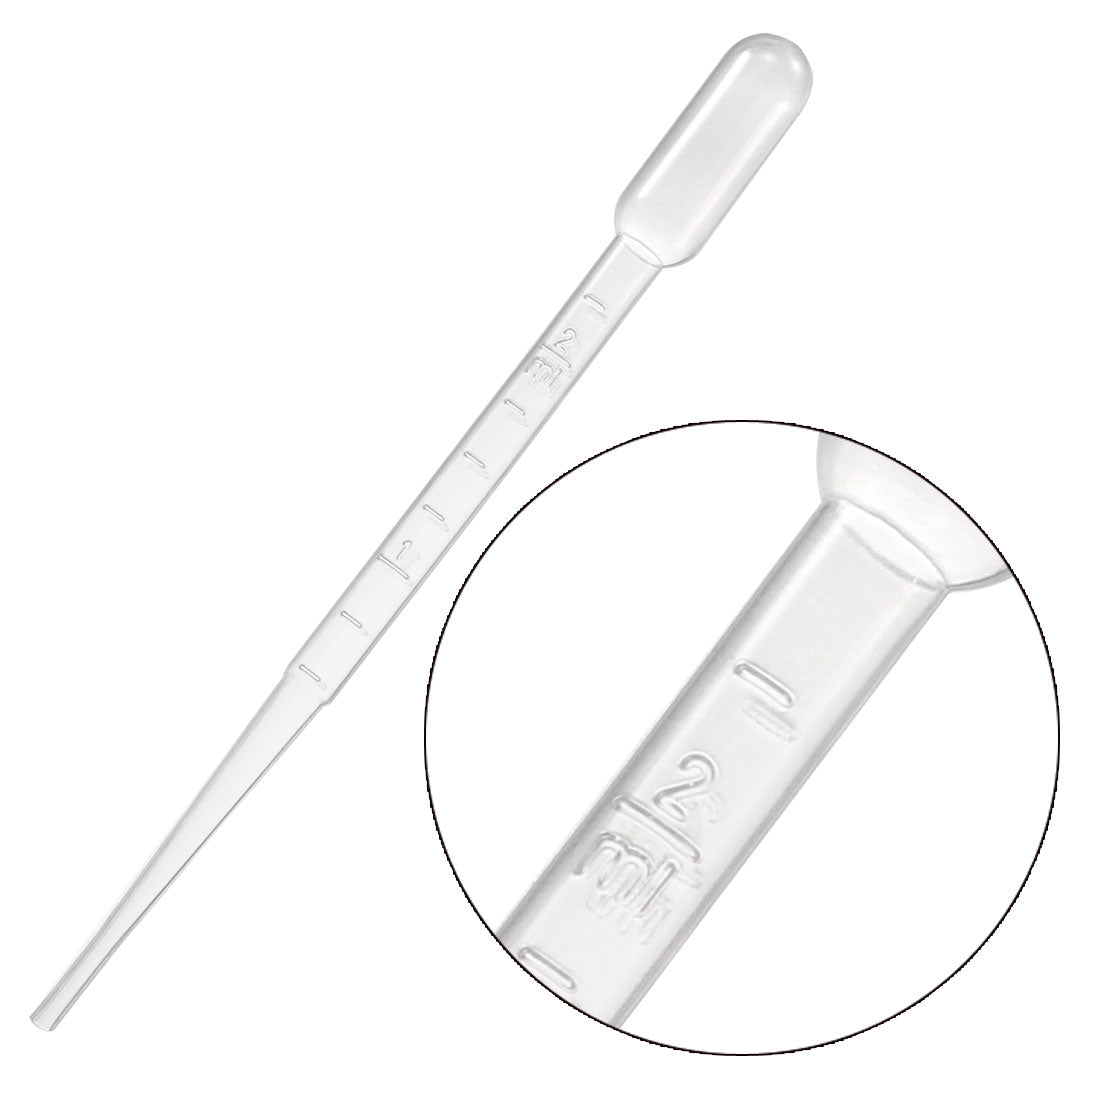 uxcell Uxcell 50 Pcs 2ml Disposable Pasteur Pipettes Test Tubes Liquid Drop Droppers Graduated 146mm Long